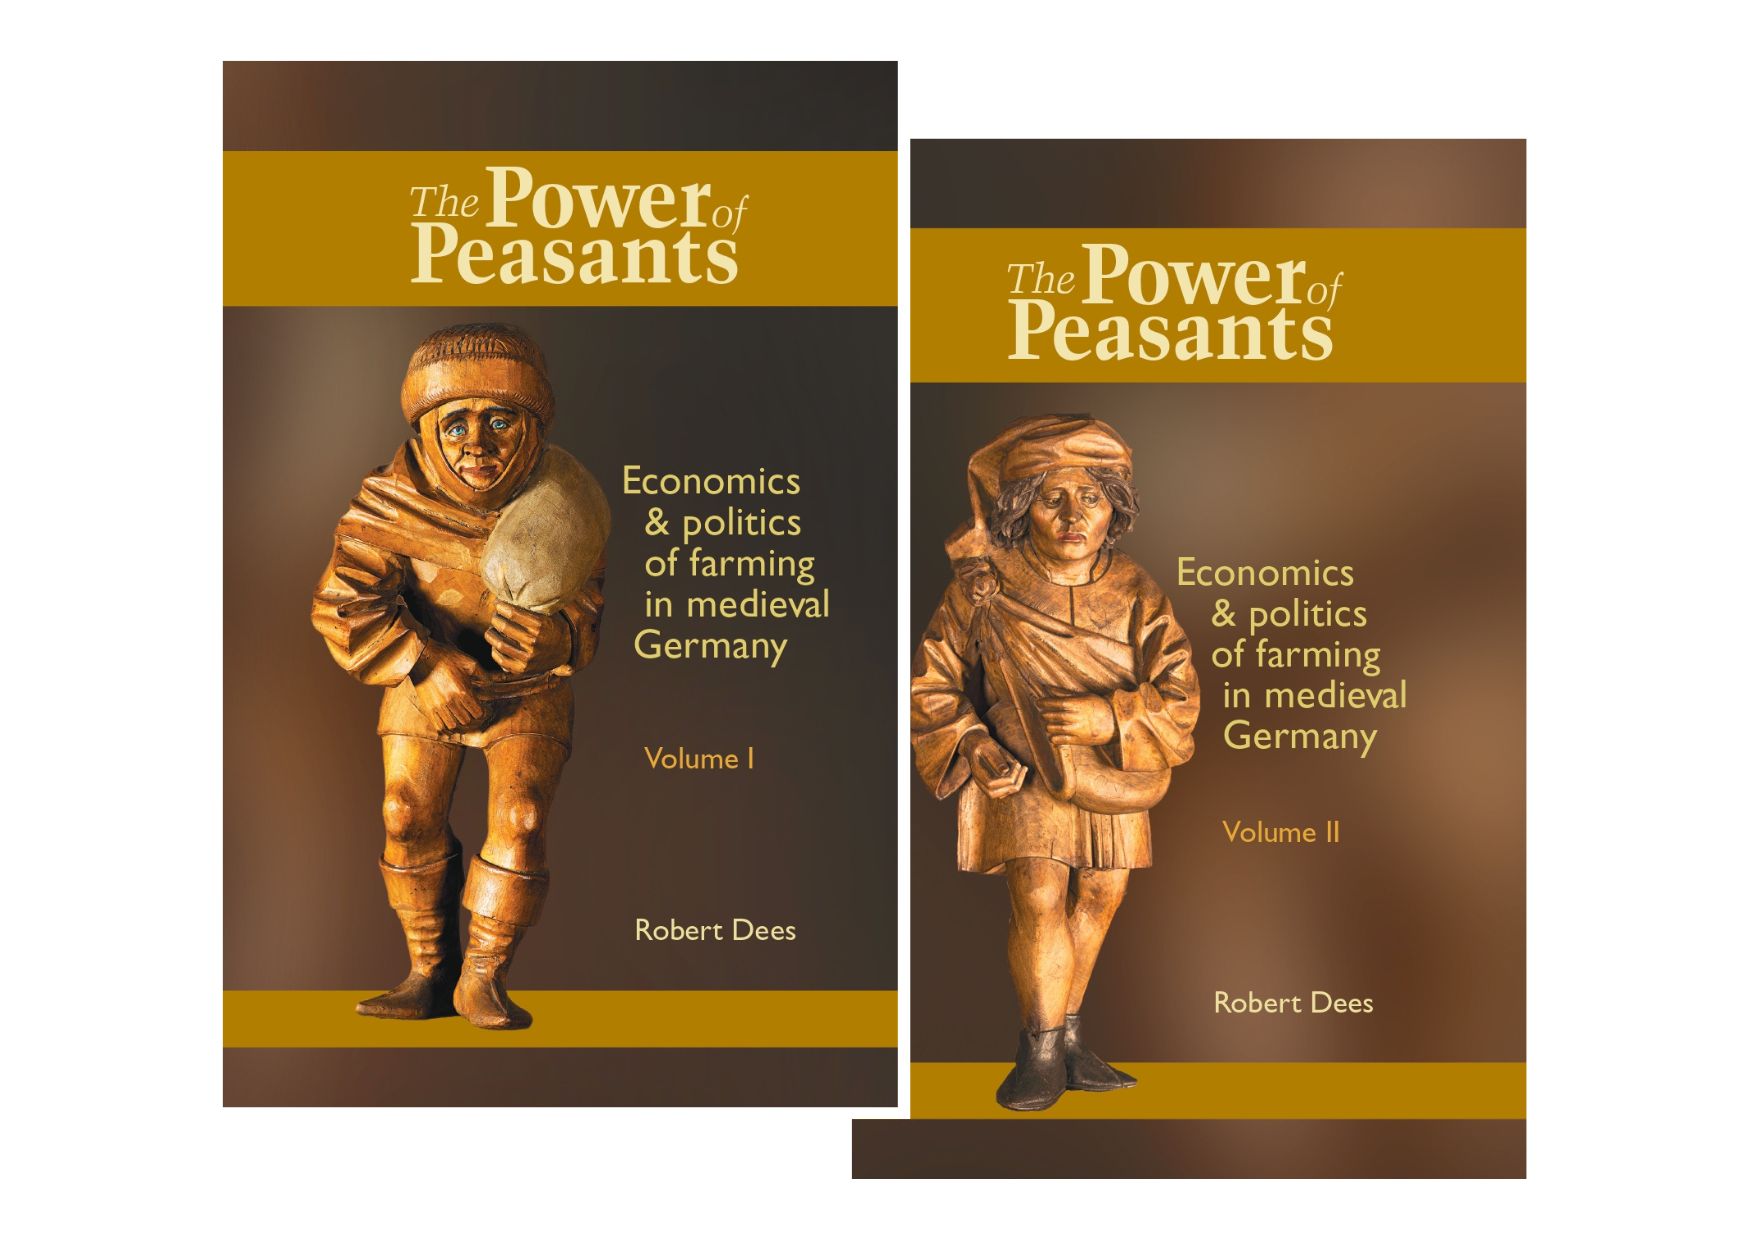 Book Cover of the Power of Peasants - Economics & politics of farming in medieval Germany